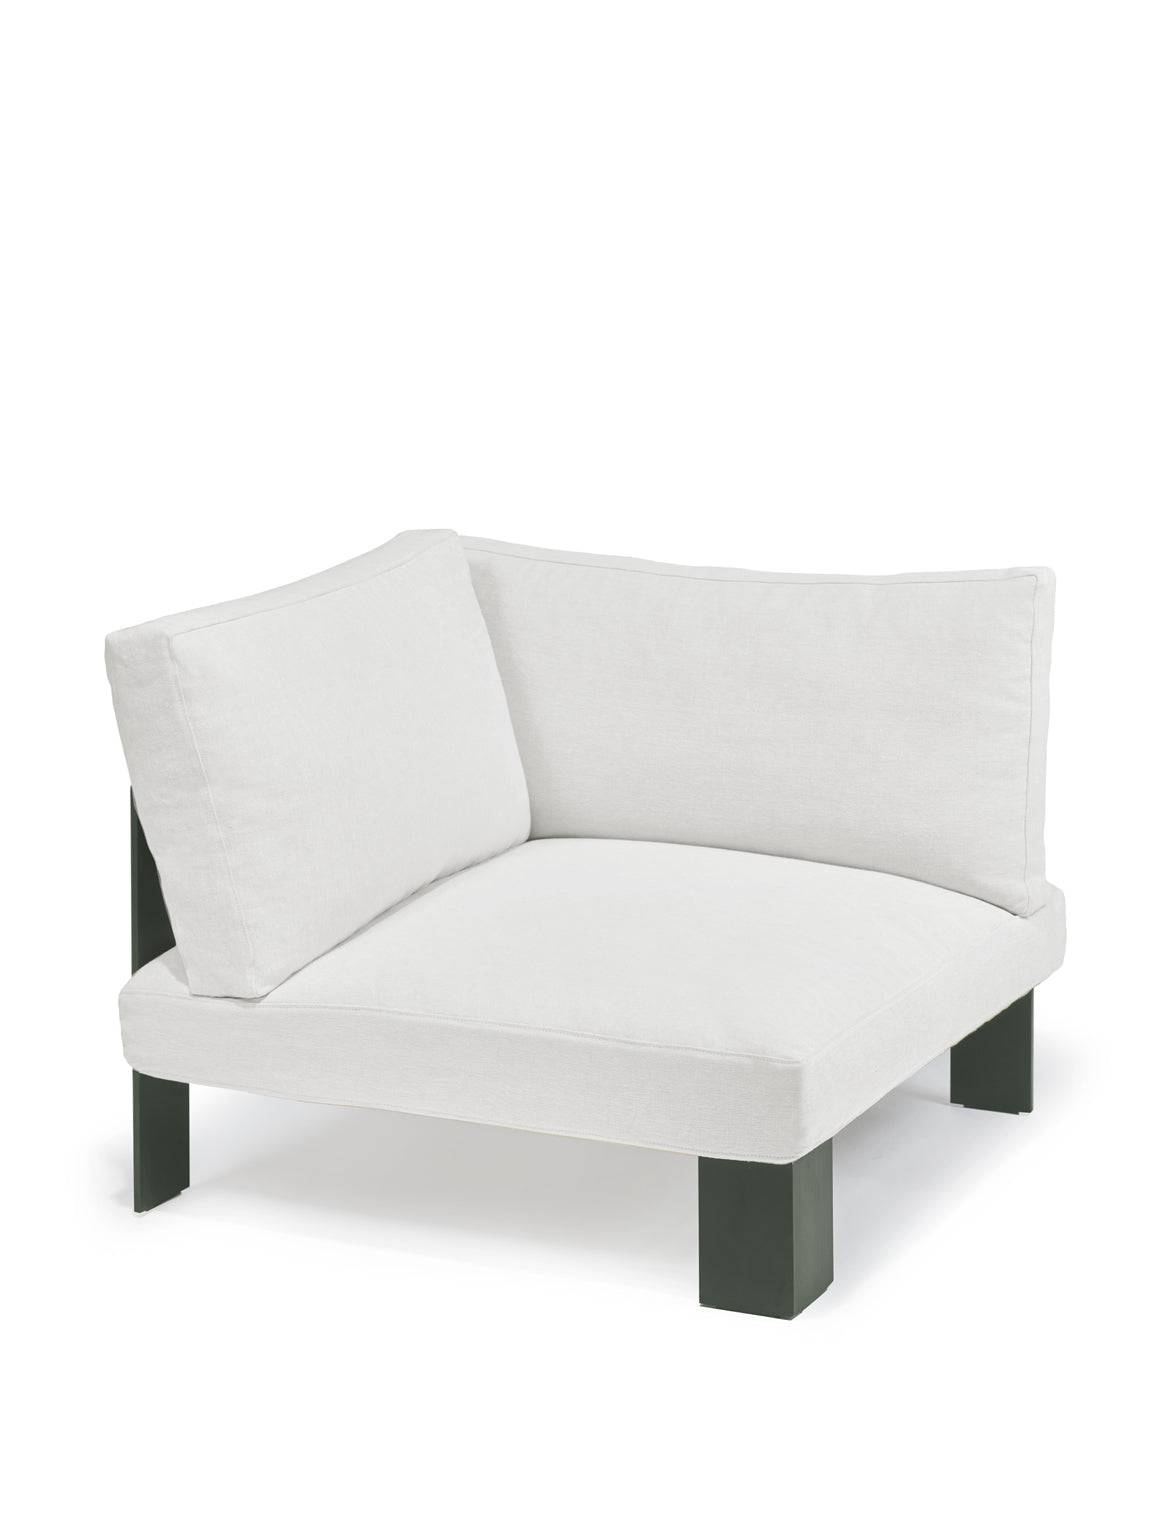 Mombaers Outdoor Sofa - White - THAT COOL LIVING